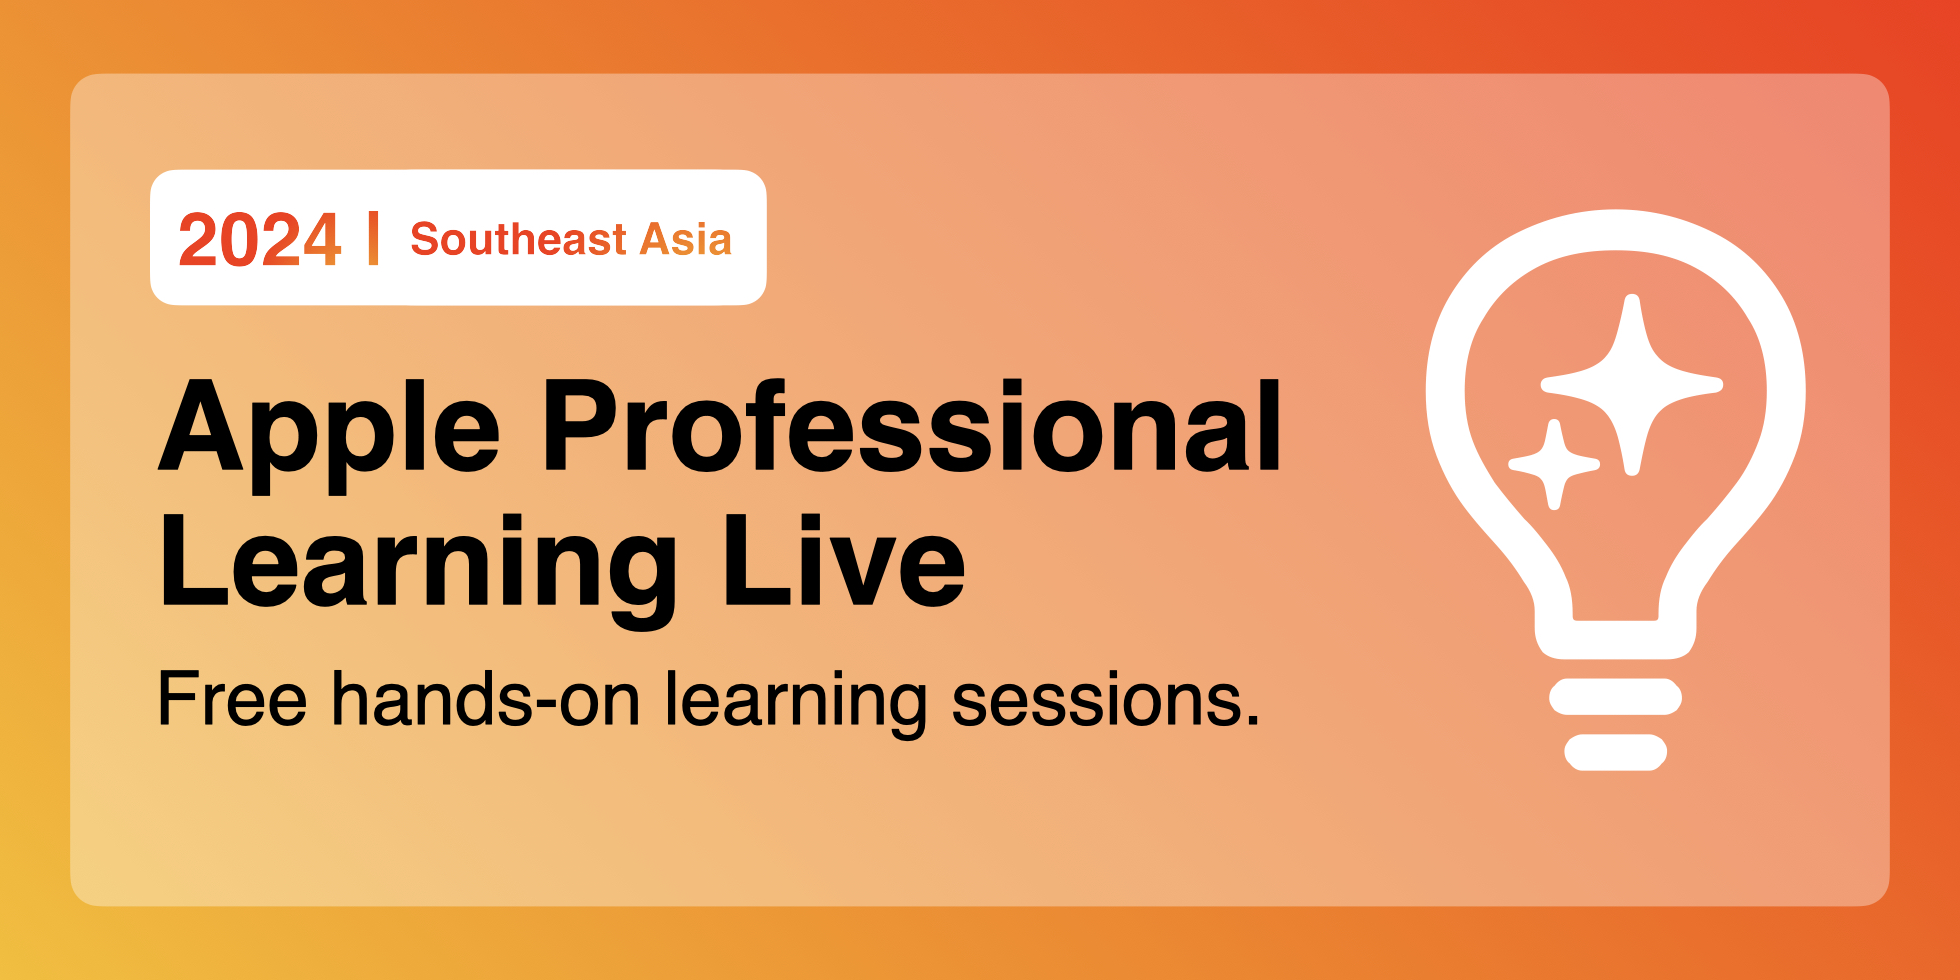 Apple Professional Learning Live for Southeast Asia. Banner containing all sessions for 2024. Free sessions.